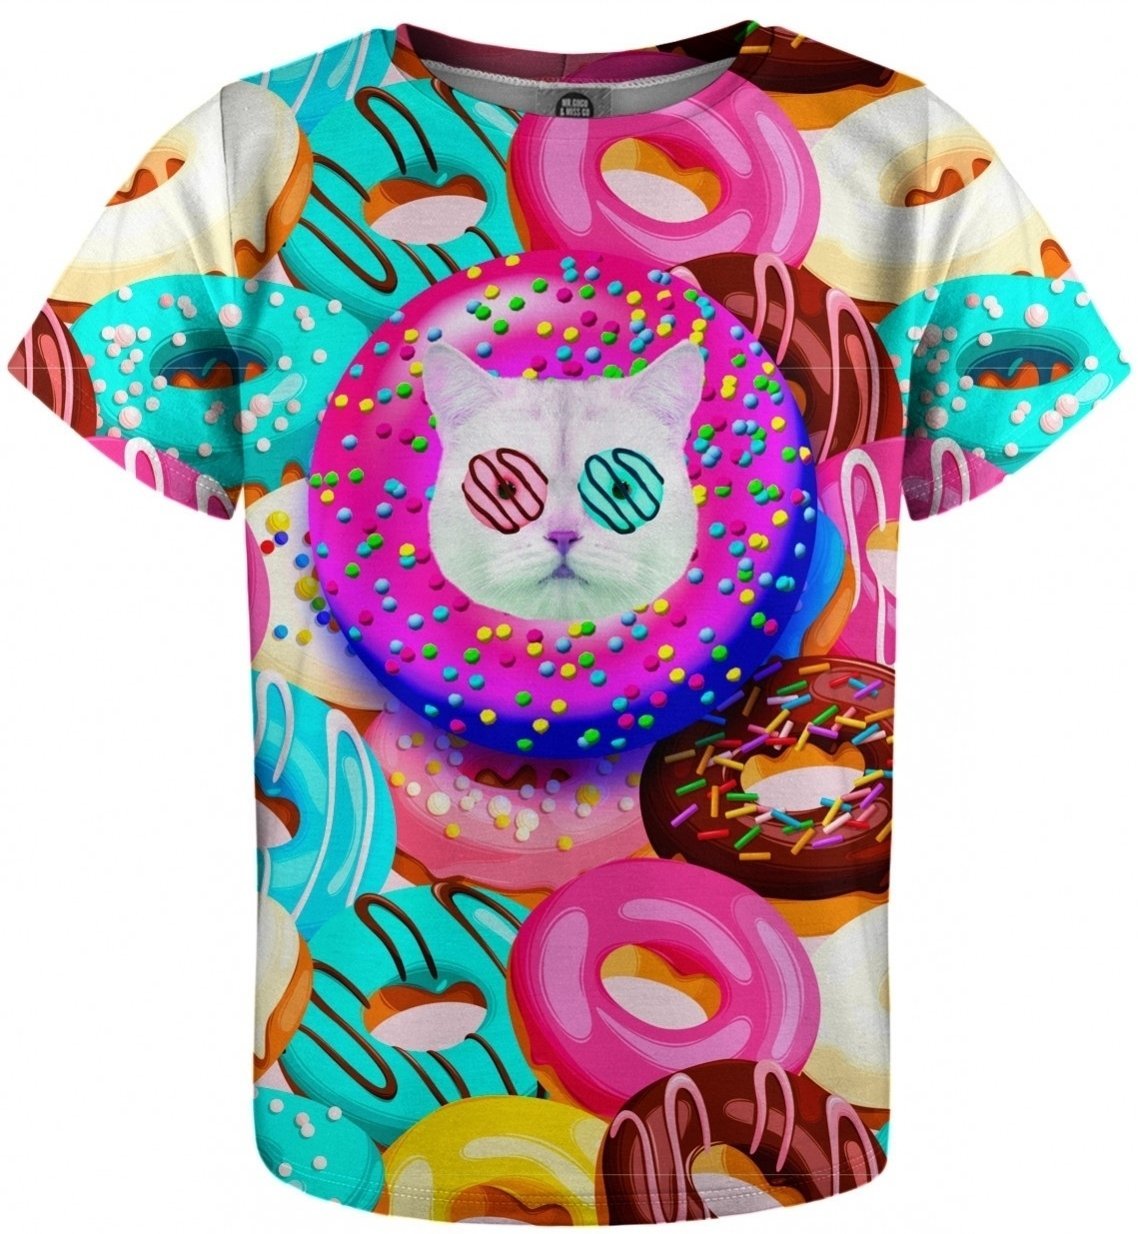 T-Shirt Mr. Gugu and Miss Go T-Shirt Donut Cat 4 - 6 Y